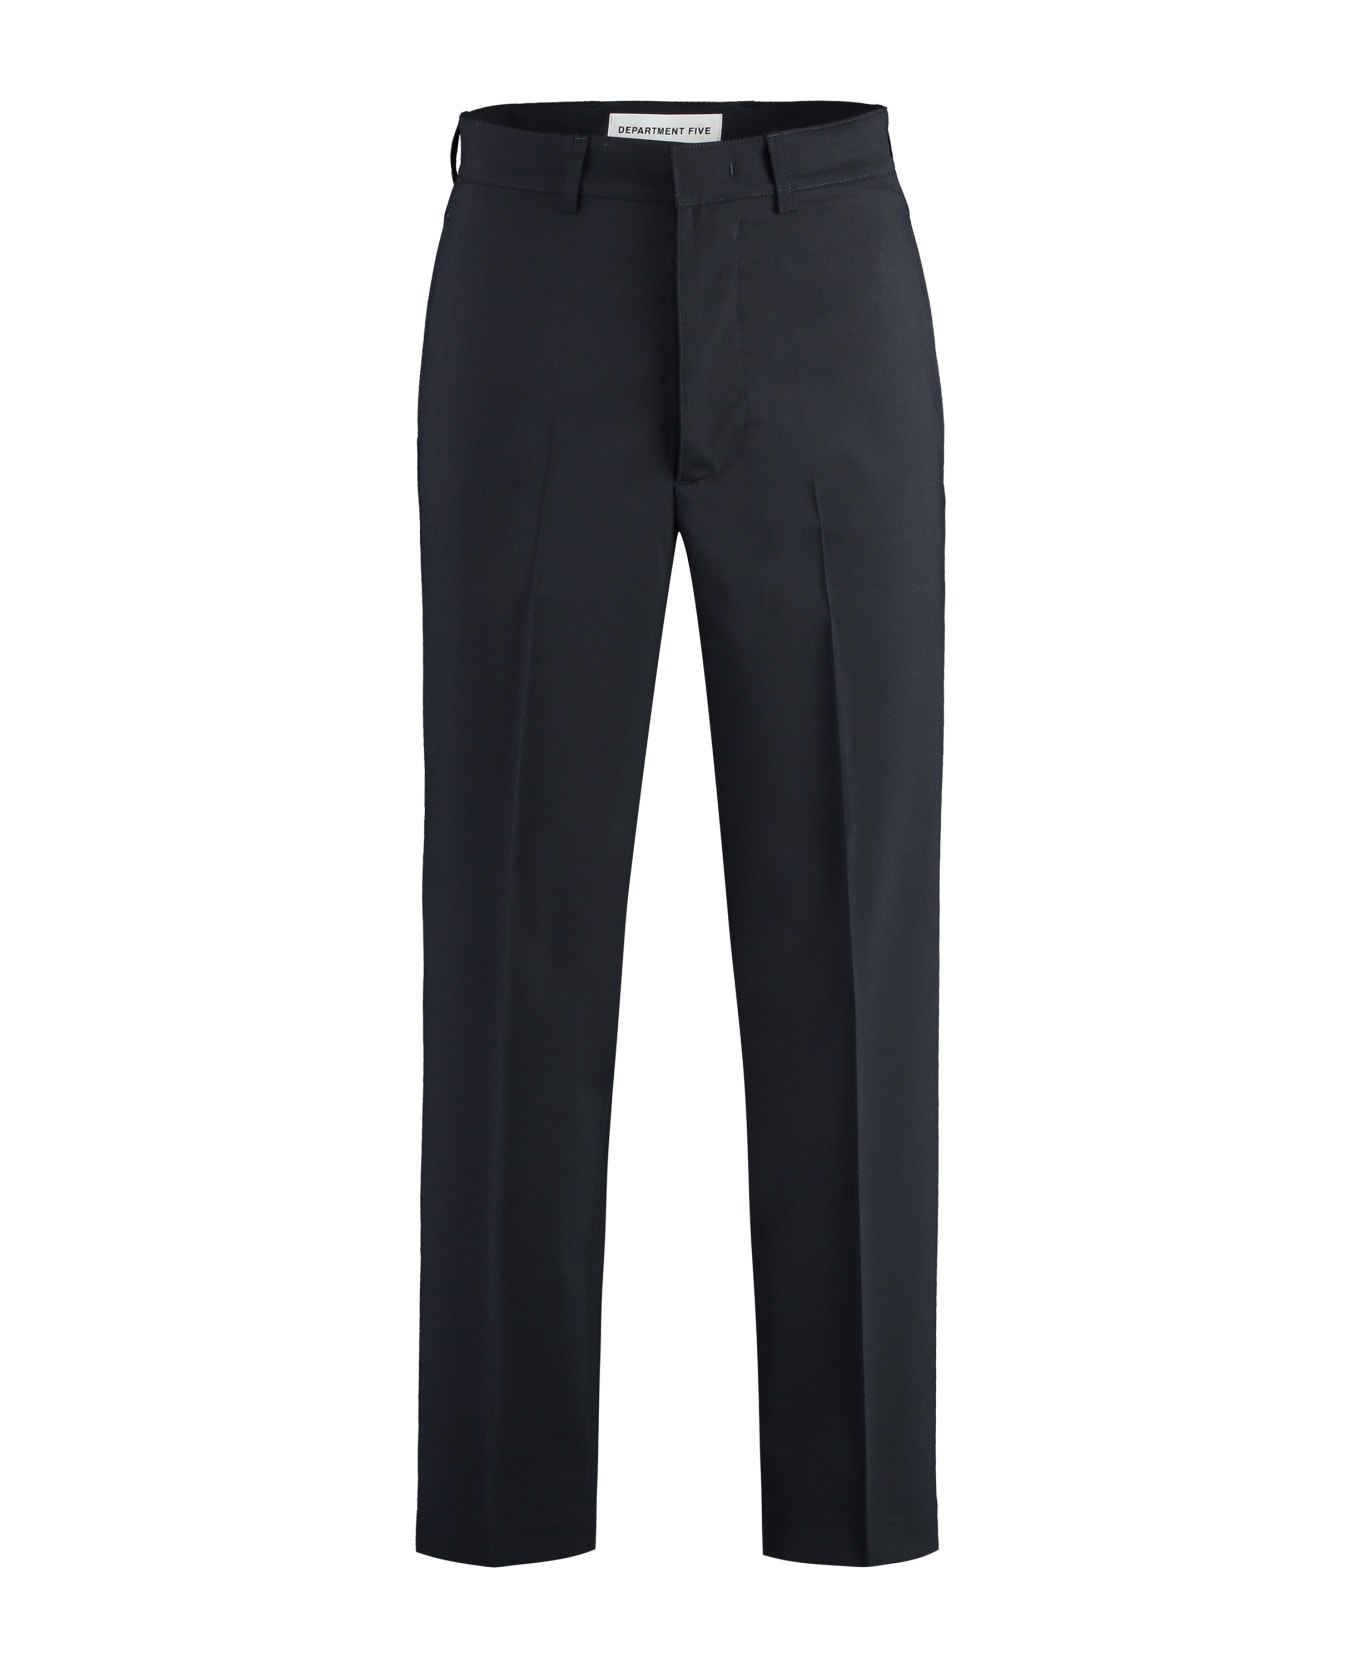 Department Five E-motion Wool Blend Trousers - blue ボトムス